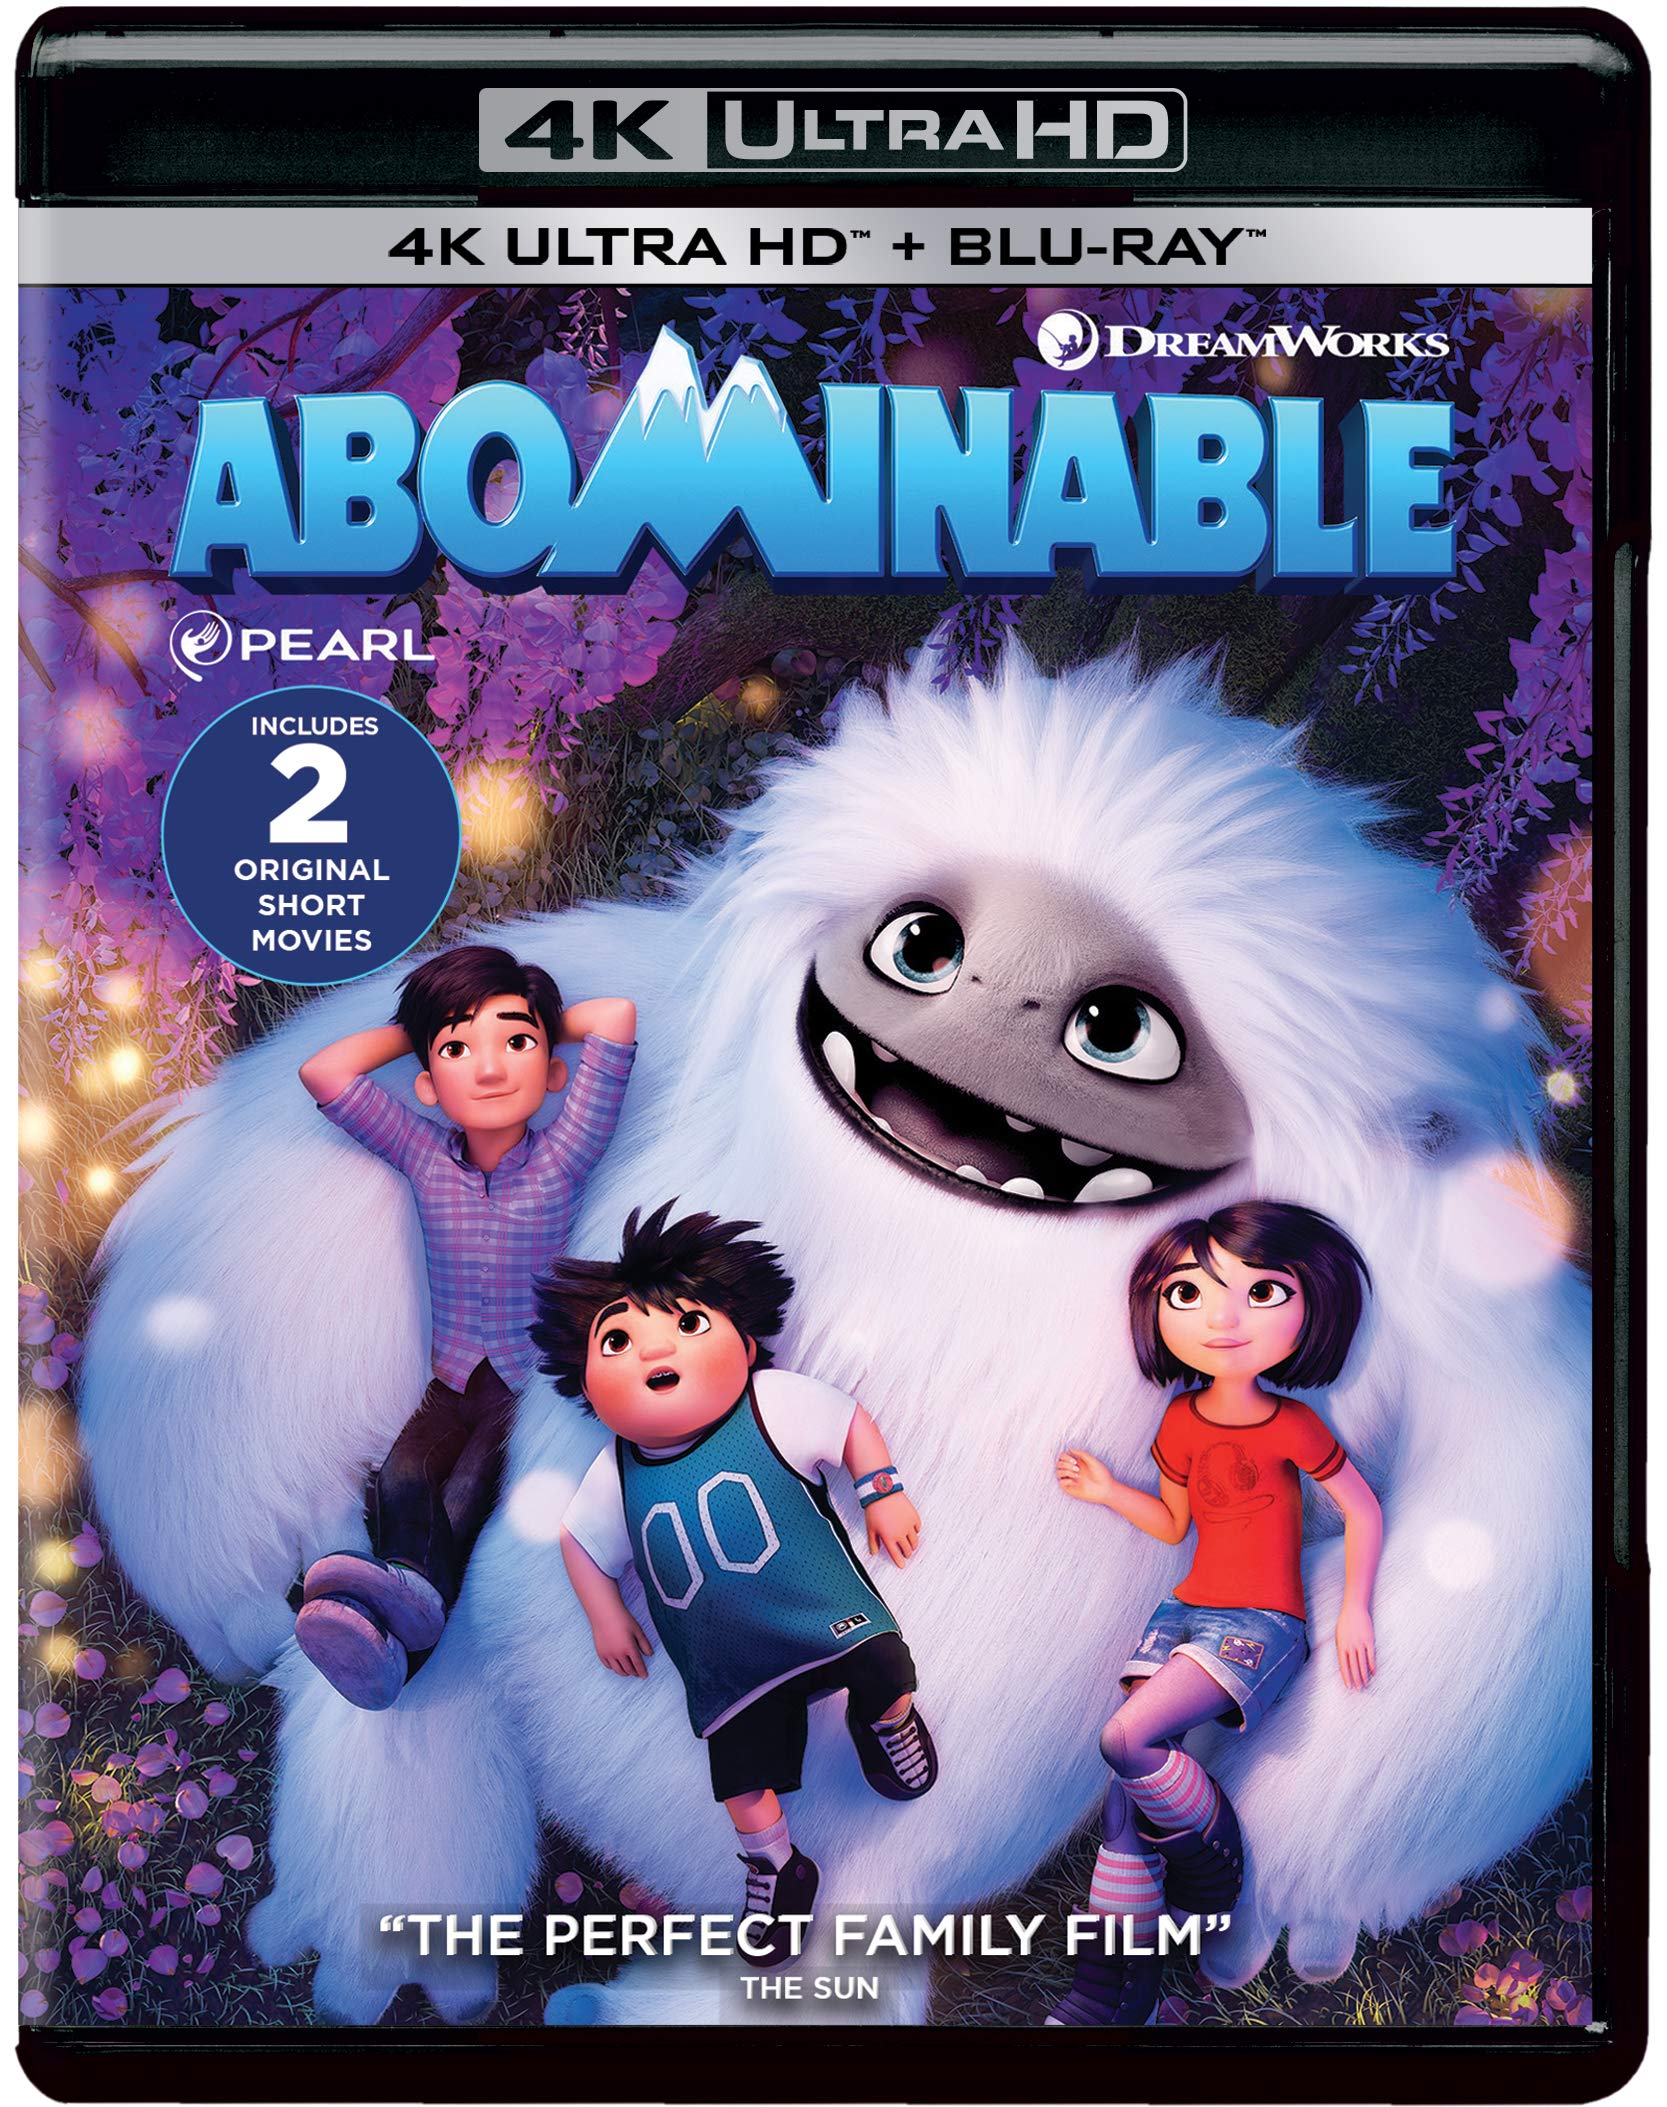 abominable-4k-uhd-hd-2-disc-movie-purchase-or-watch-online